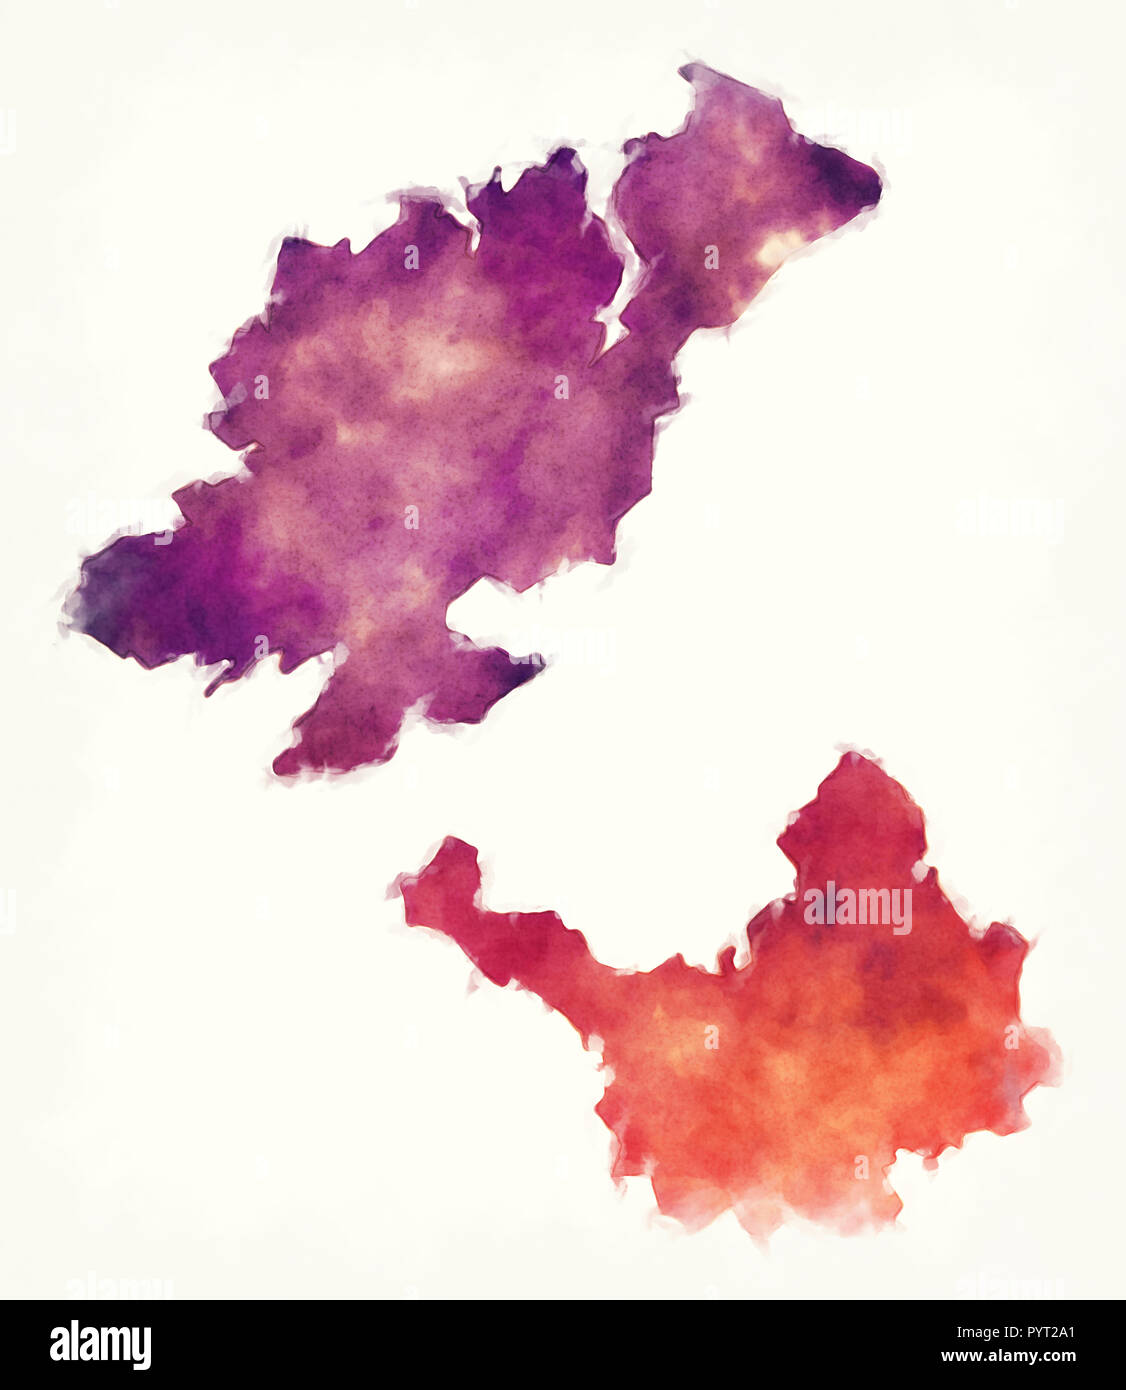 Ulster province map of Ireland in front of a white background Stock Photo